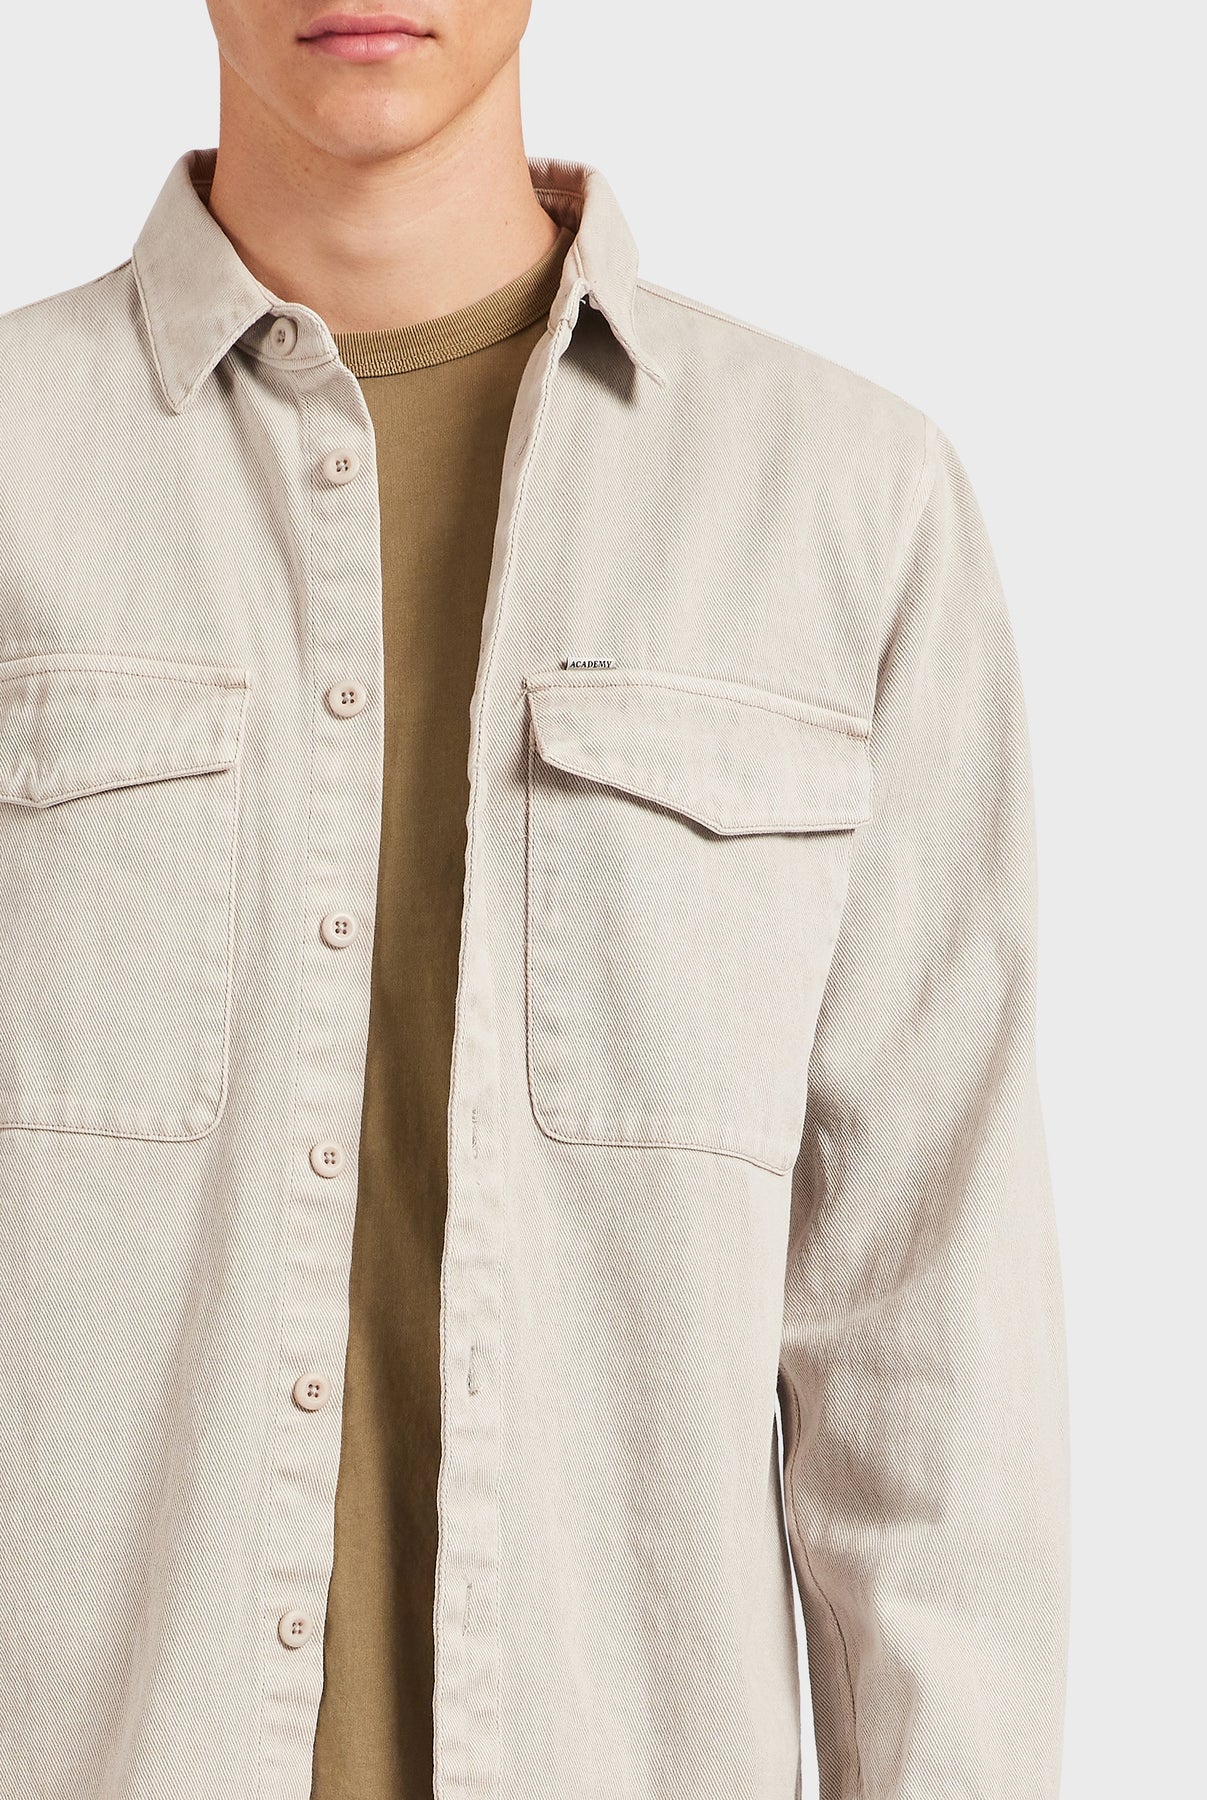 Essential Overshirt in Vapour Grey